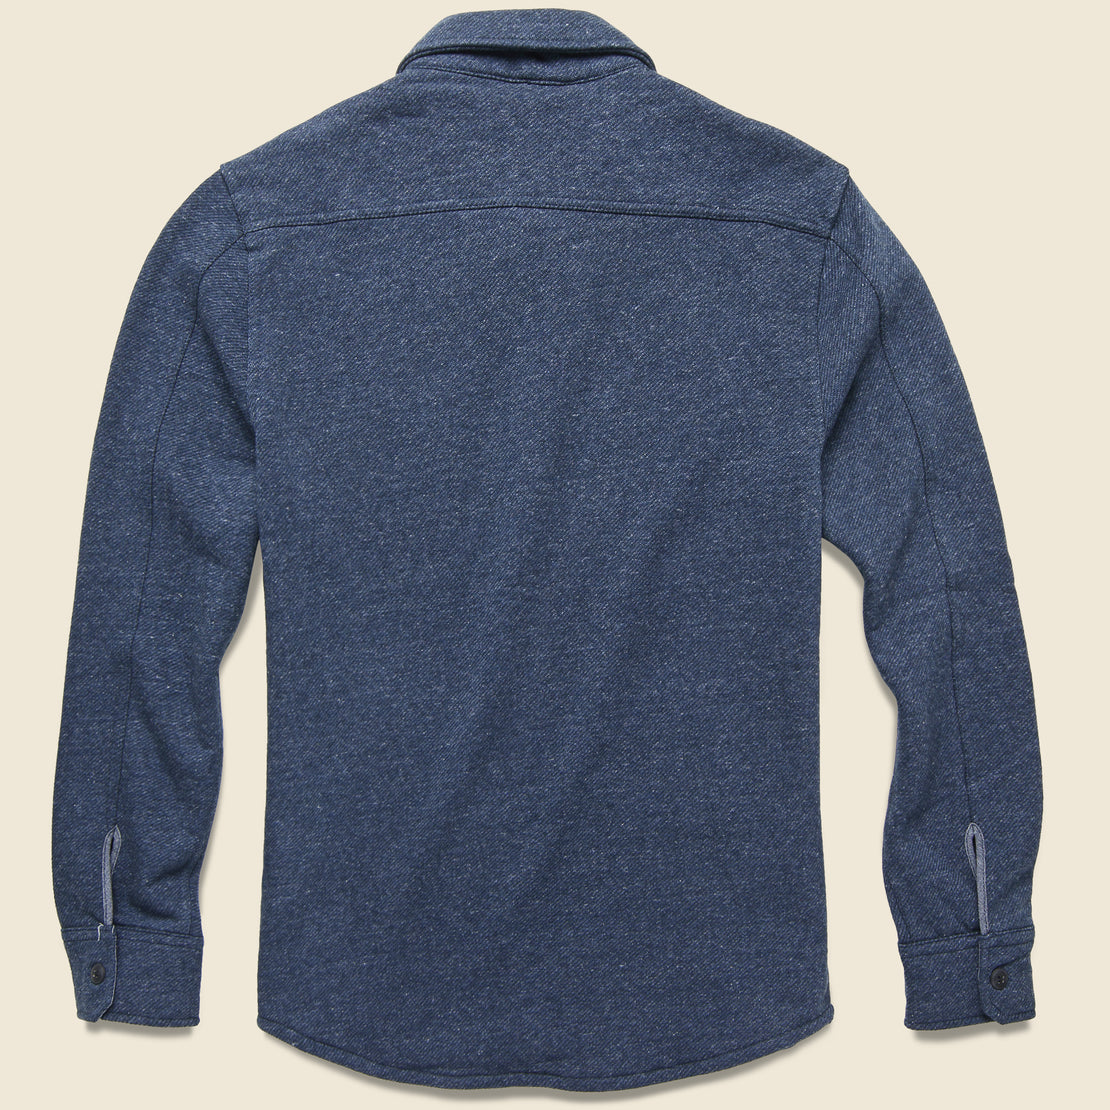 Bayswater Fleece CPO Overshirt - Navy Heather - Grayers - STAG Provisions - Tops - L/S Woven - Overshirt